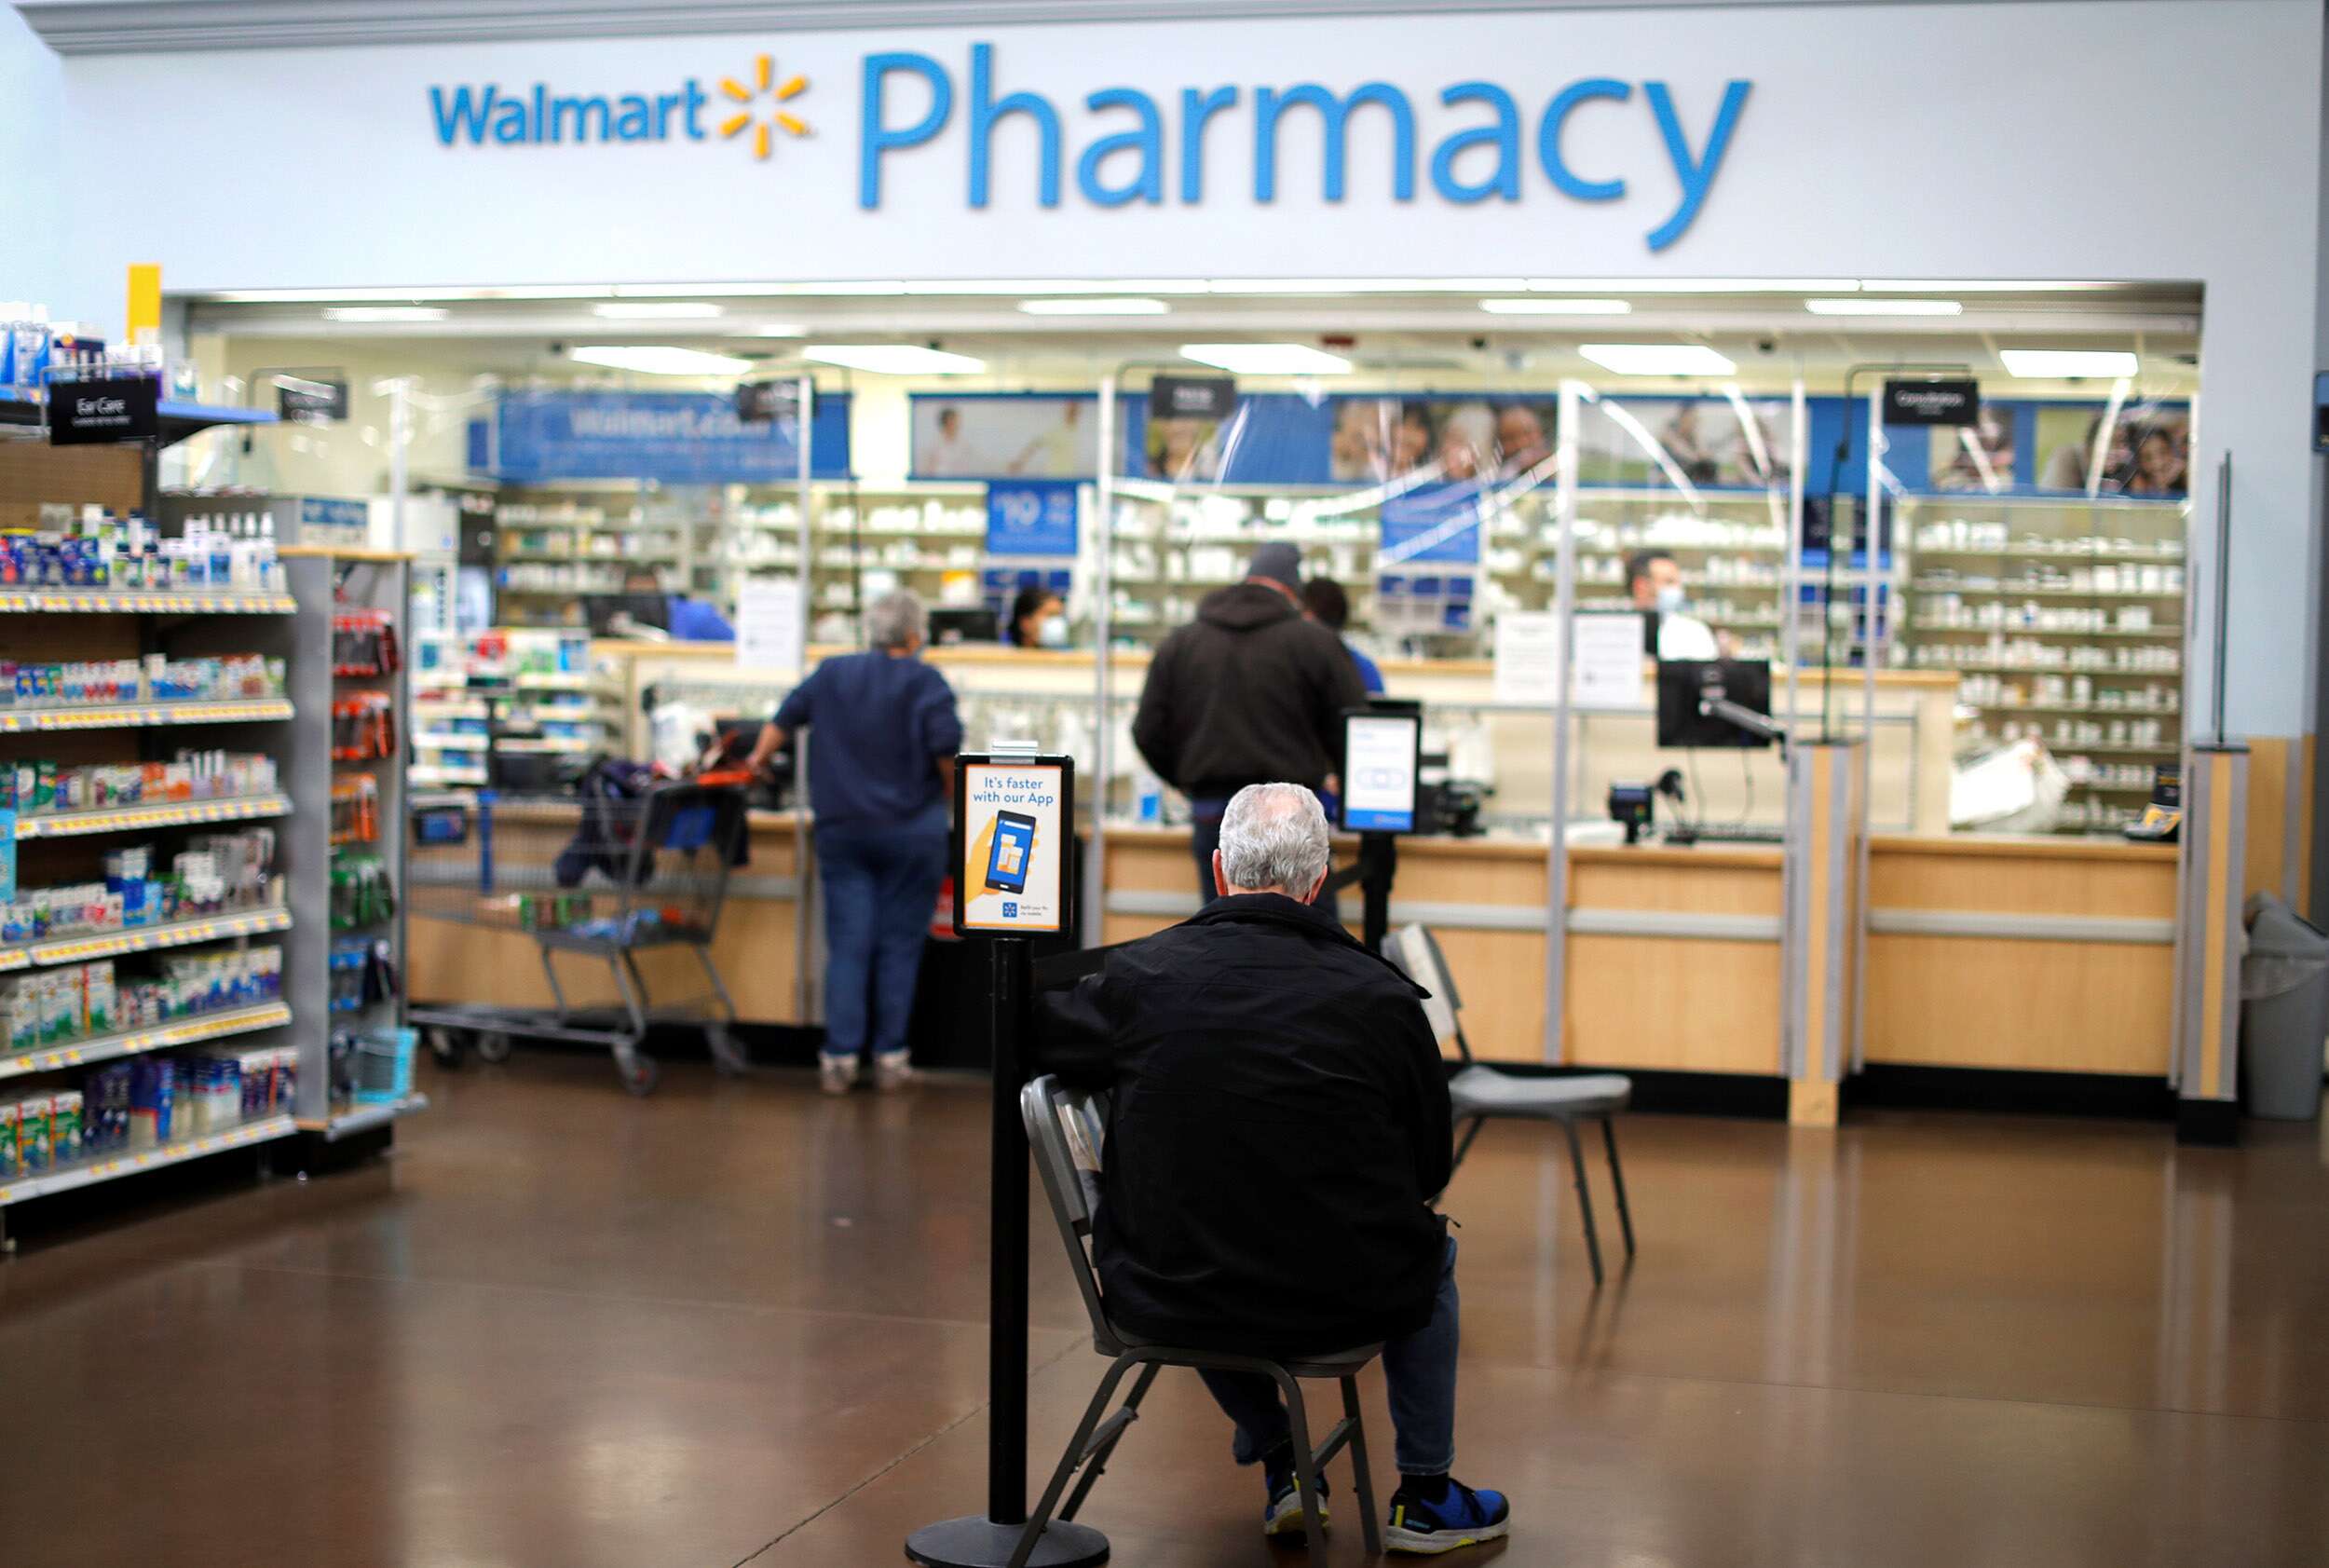 What Time Does Walmart Pharmacy Open And Close? Meds Safety